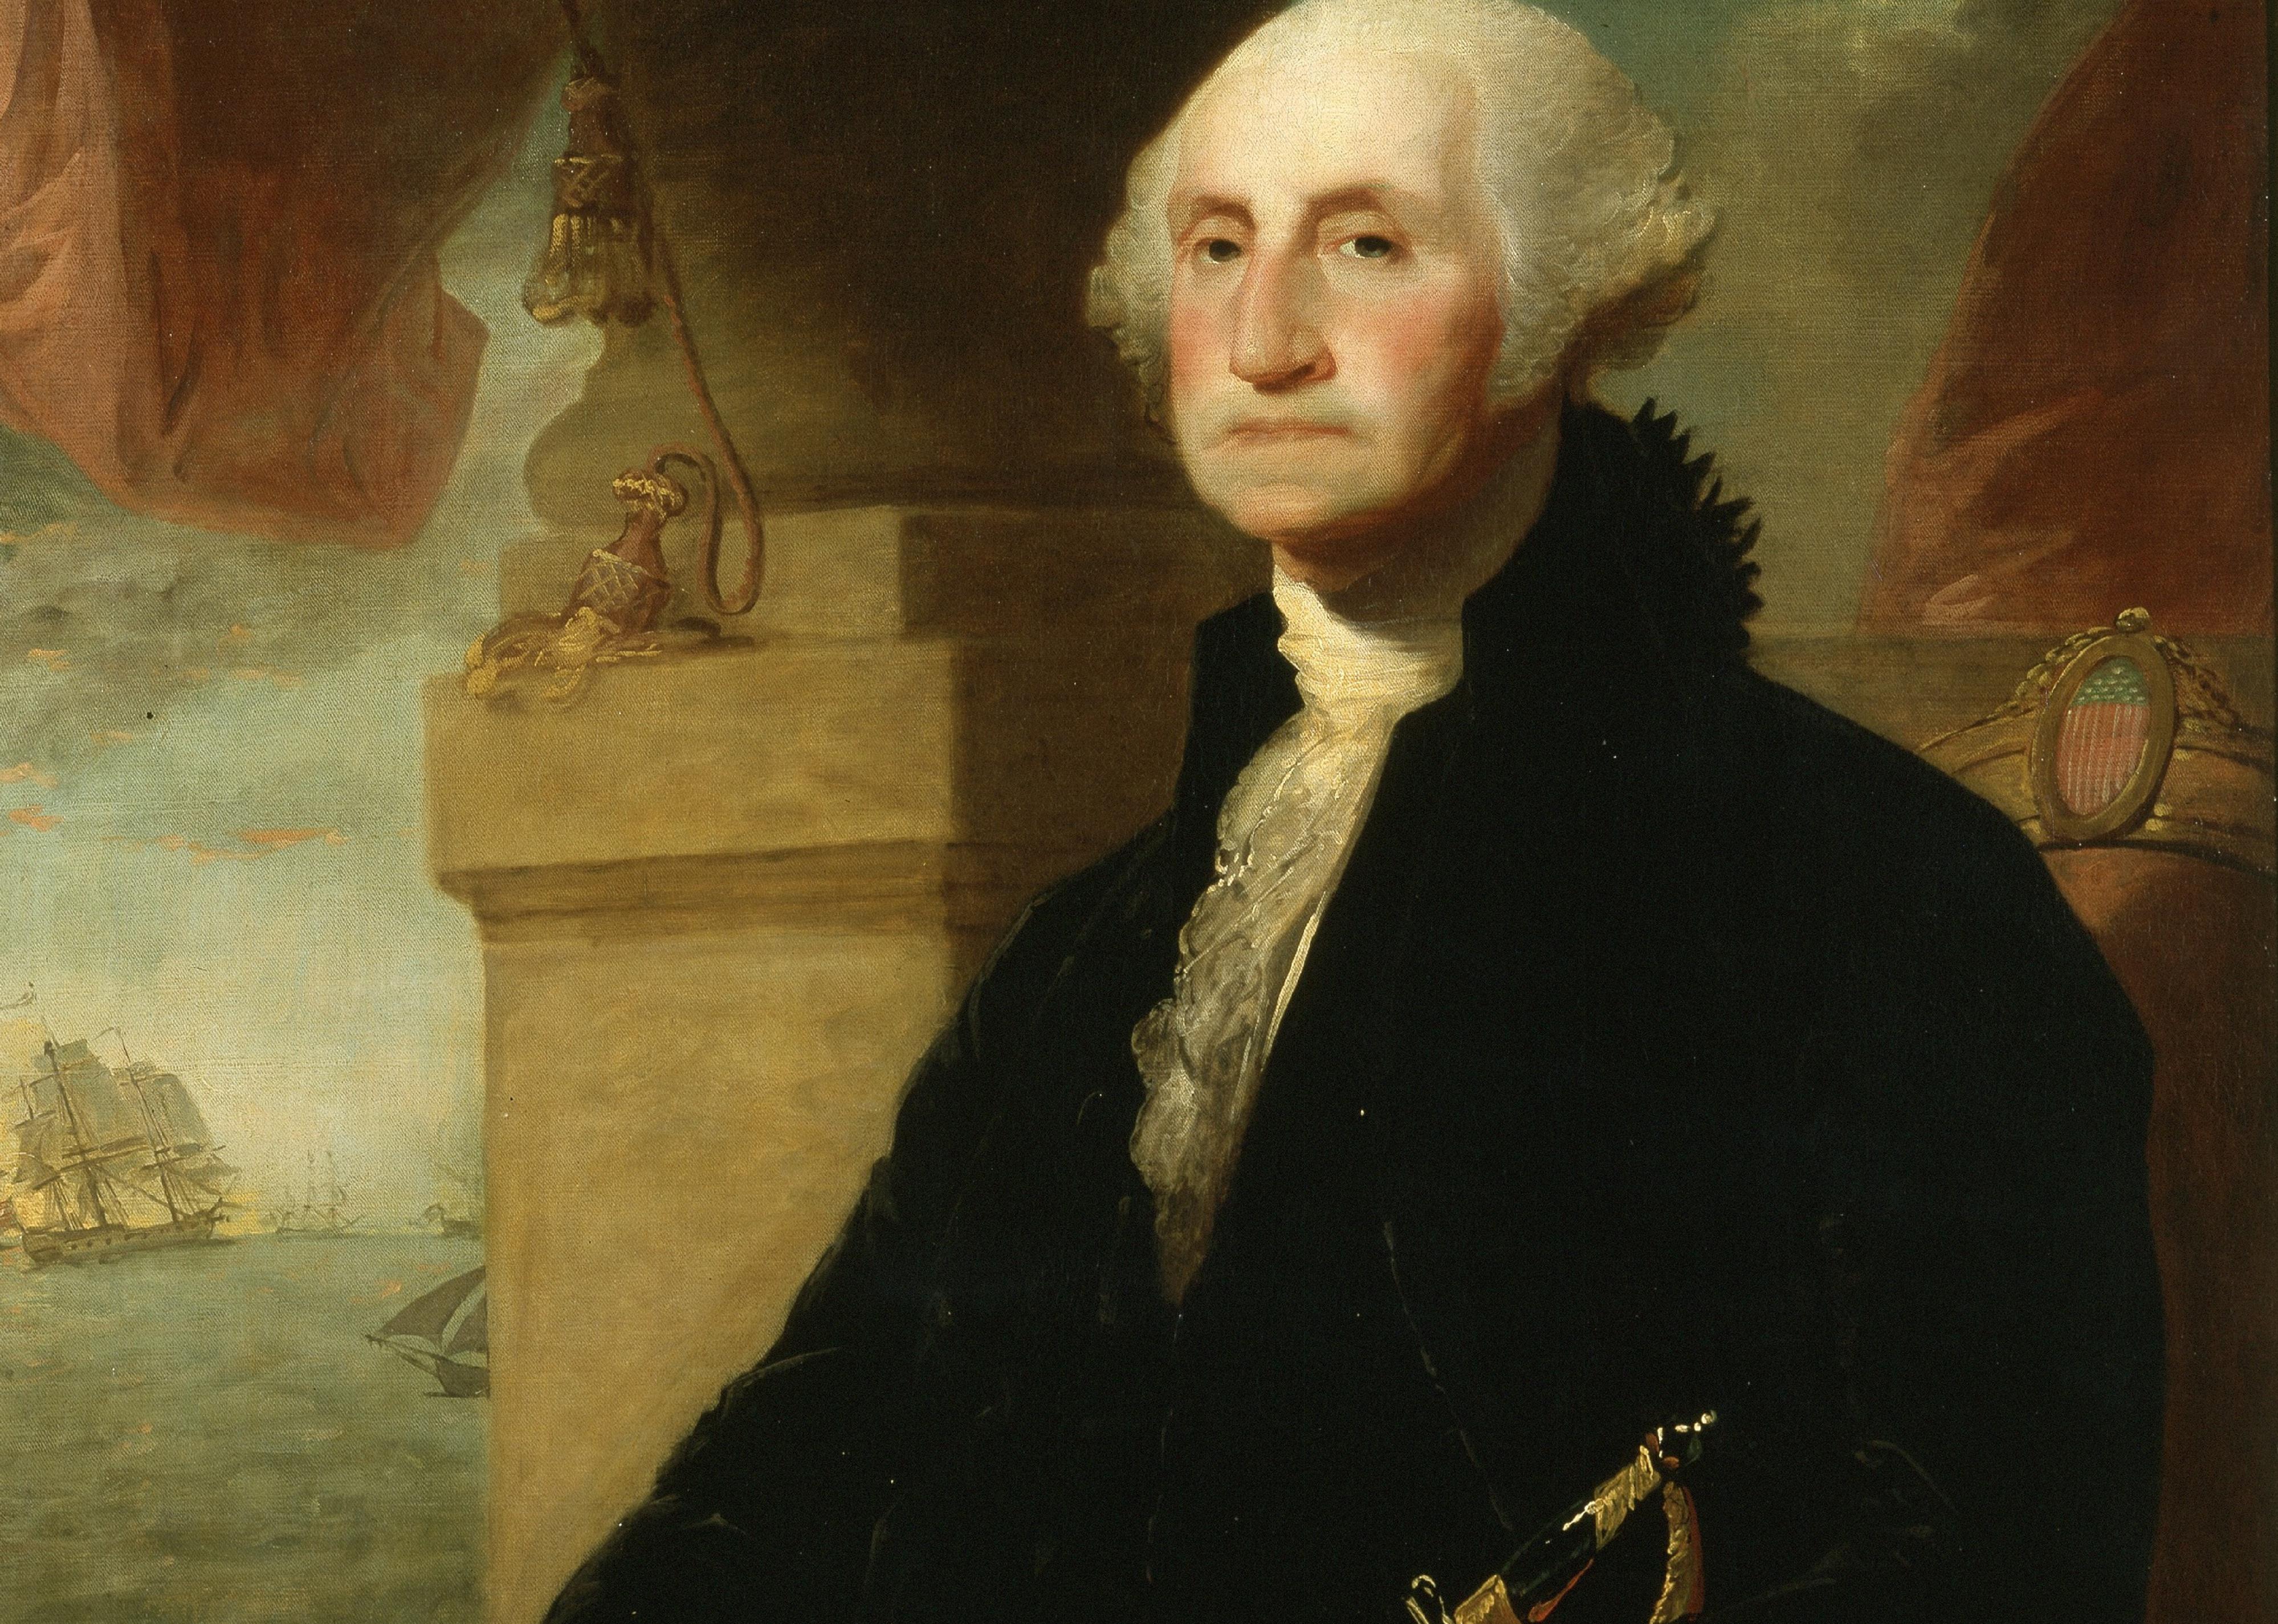 A painting of George Washington seated in a black jacket with a sword.